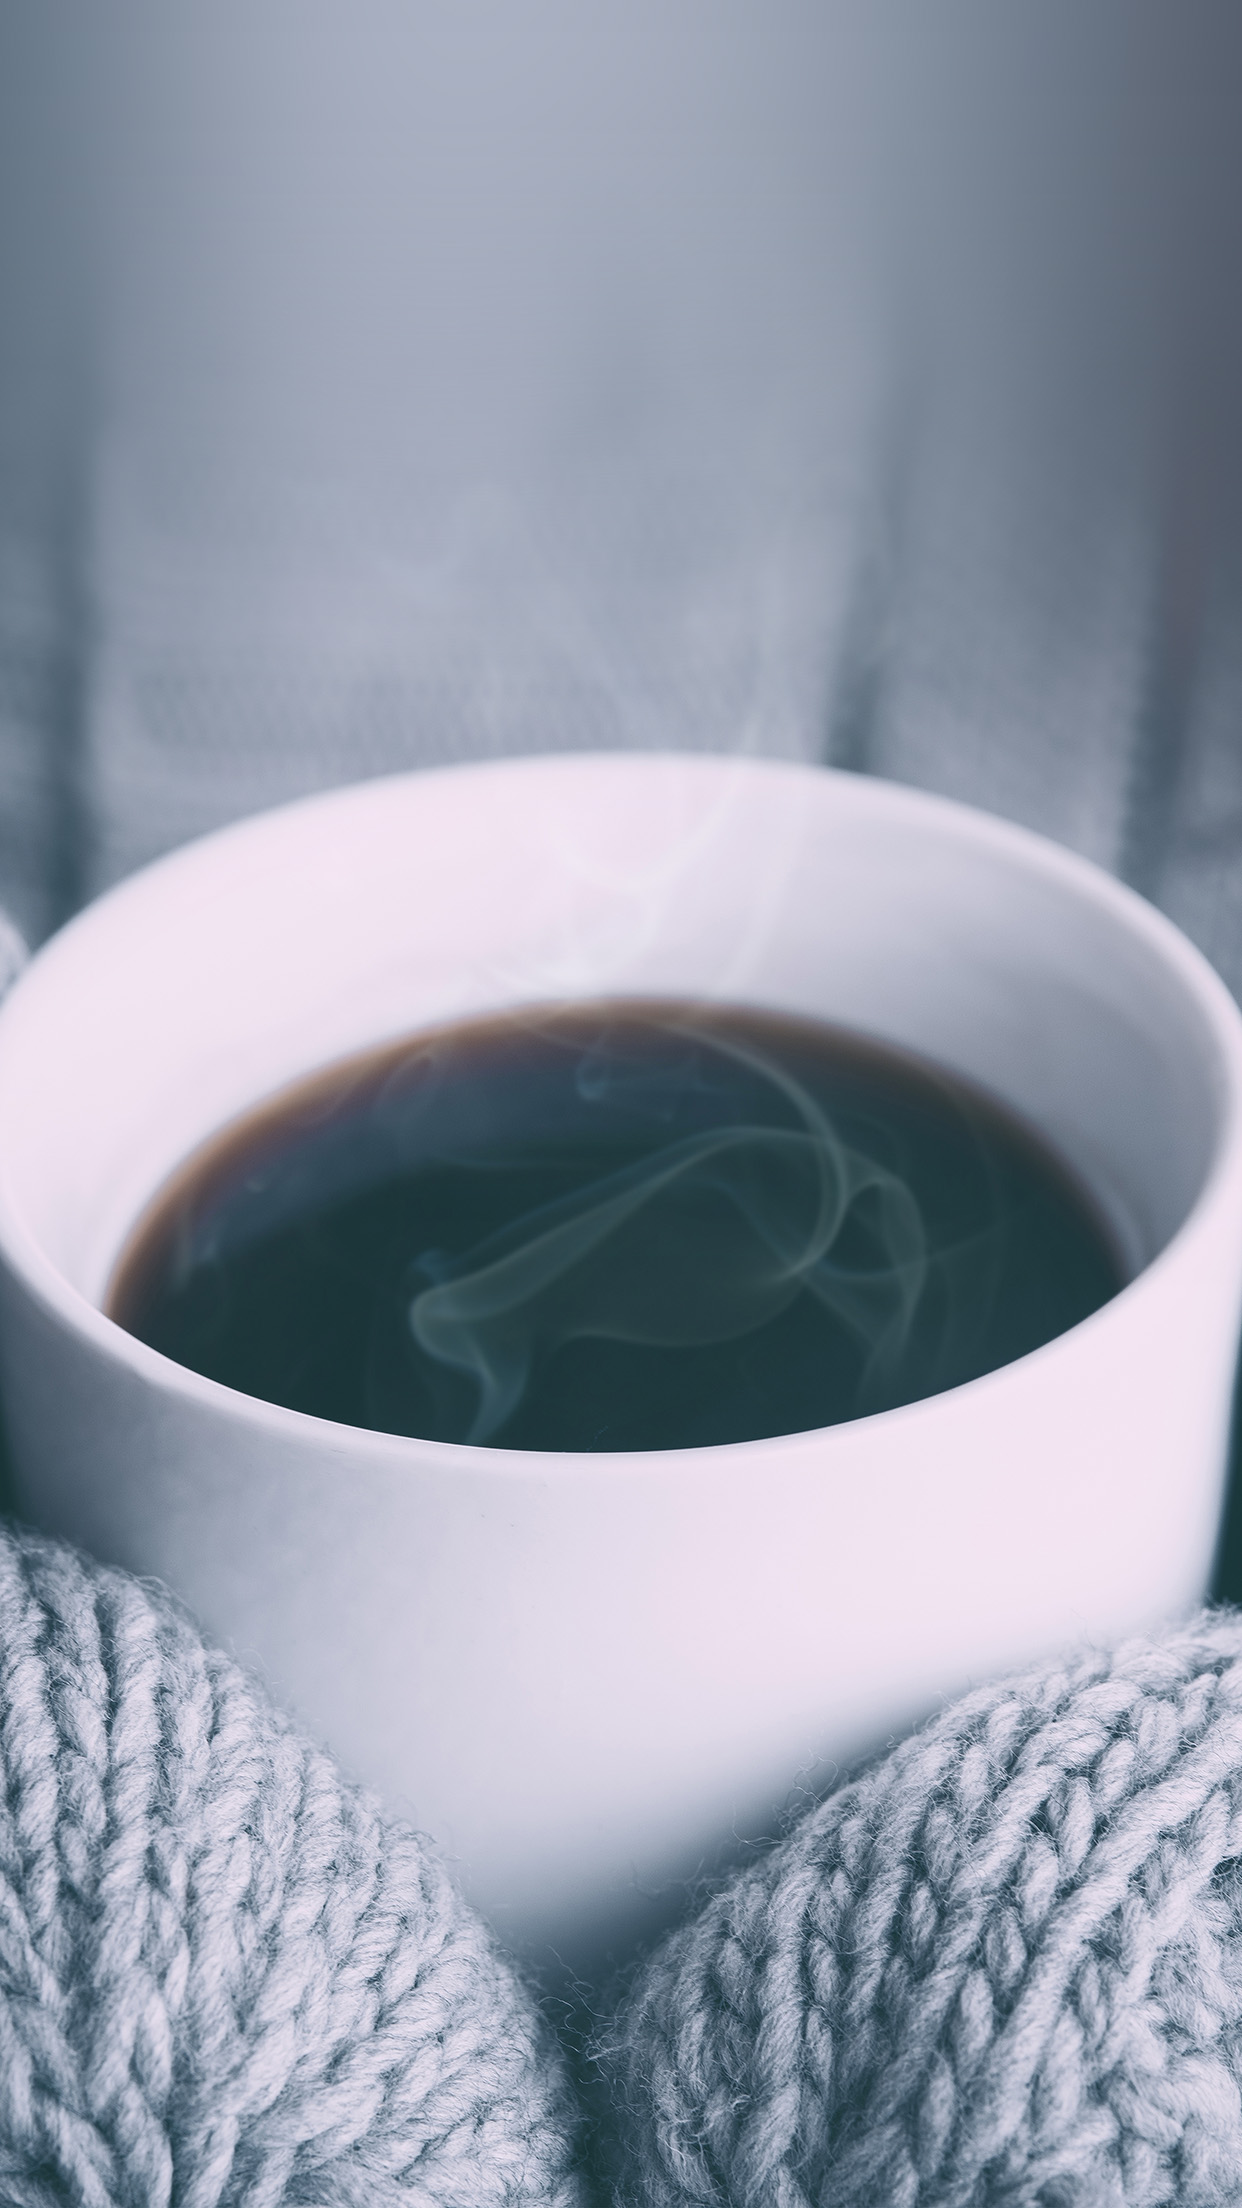 Hot coffee mod android apk